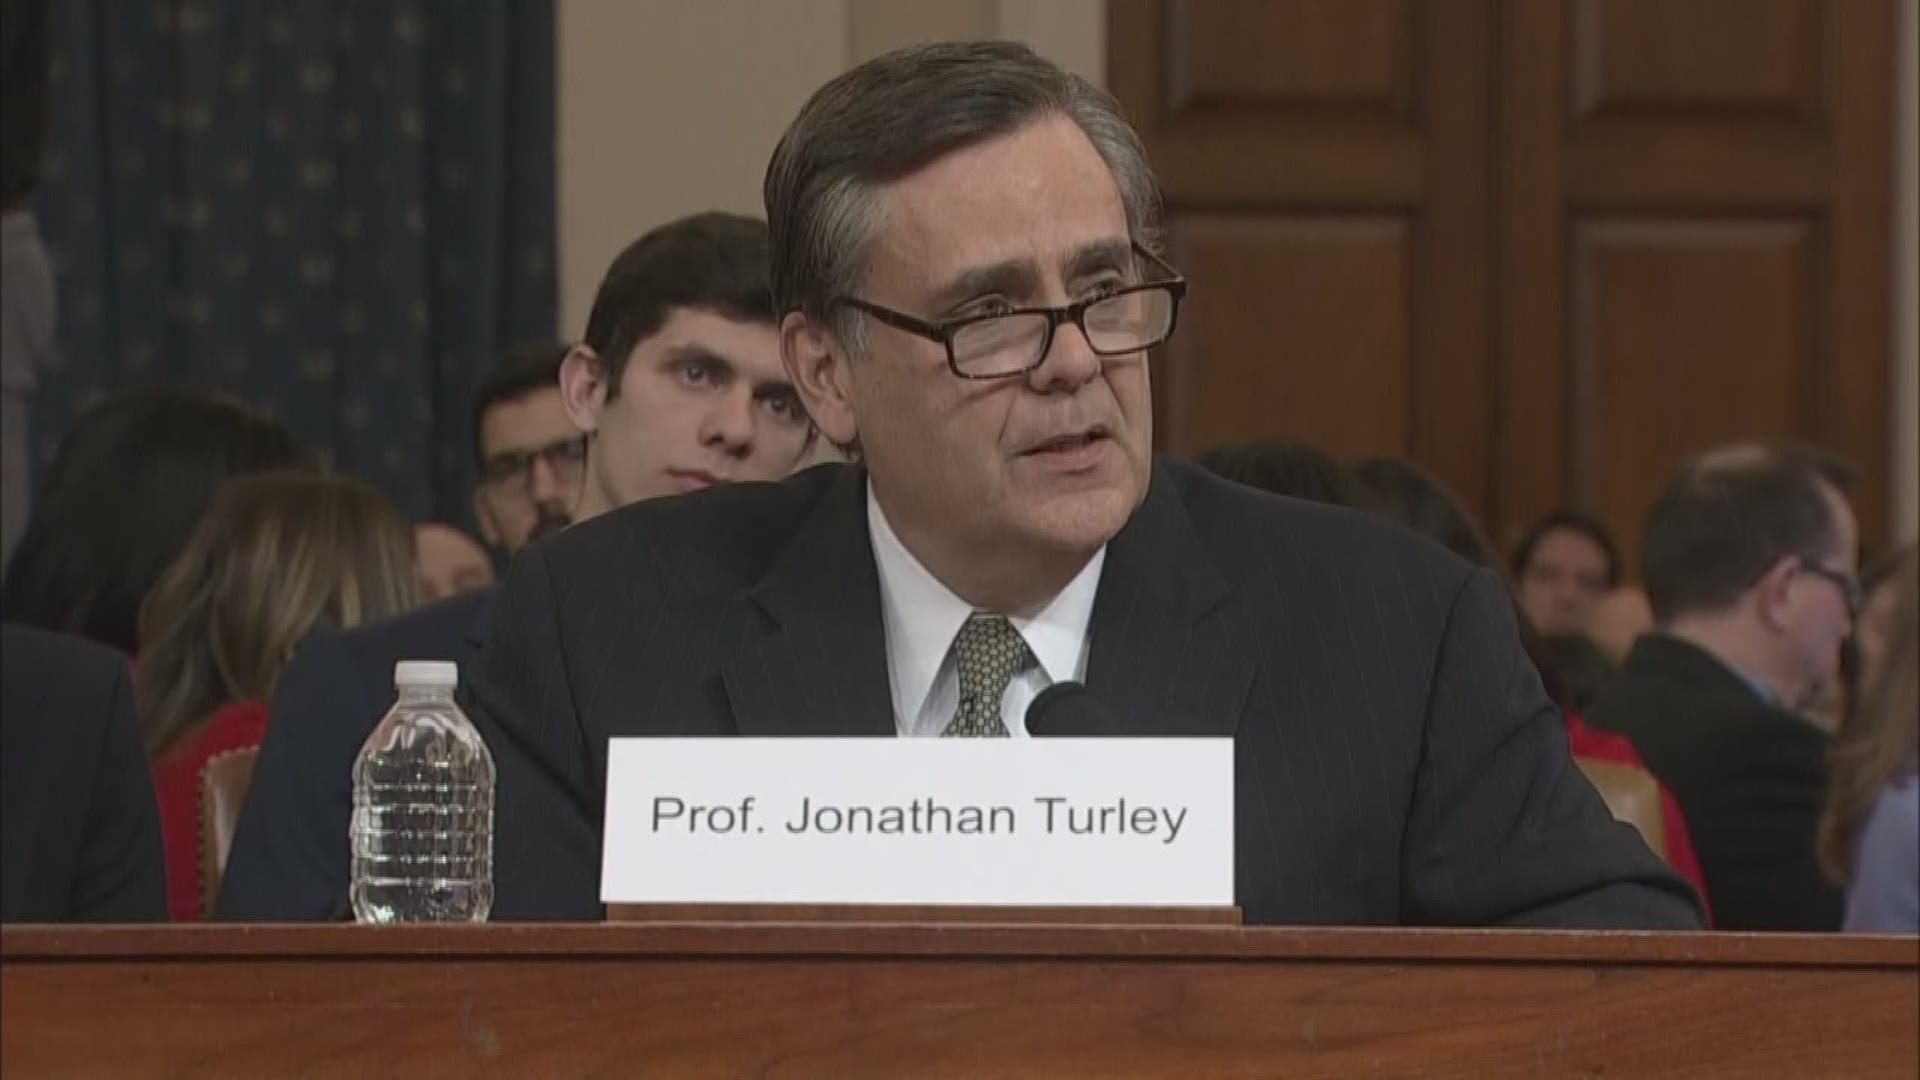 Professor Turley stressed that what is left in the wake of this impeachment 'scandal,' will shape our democracy for 'generations to come.'